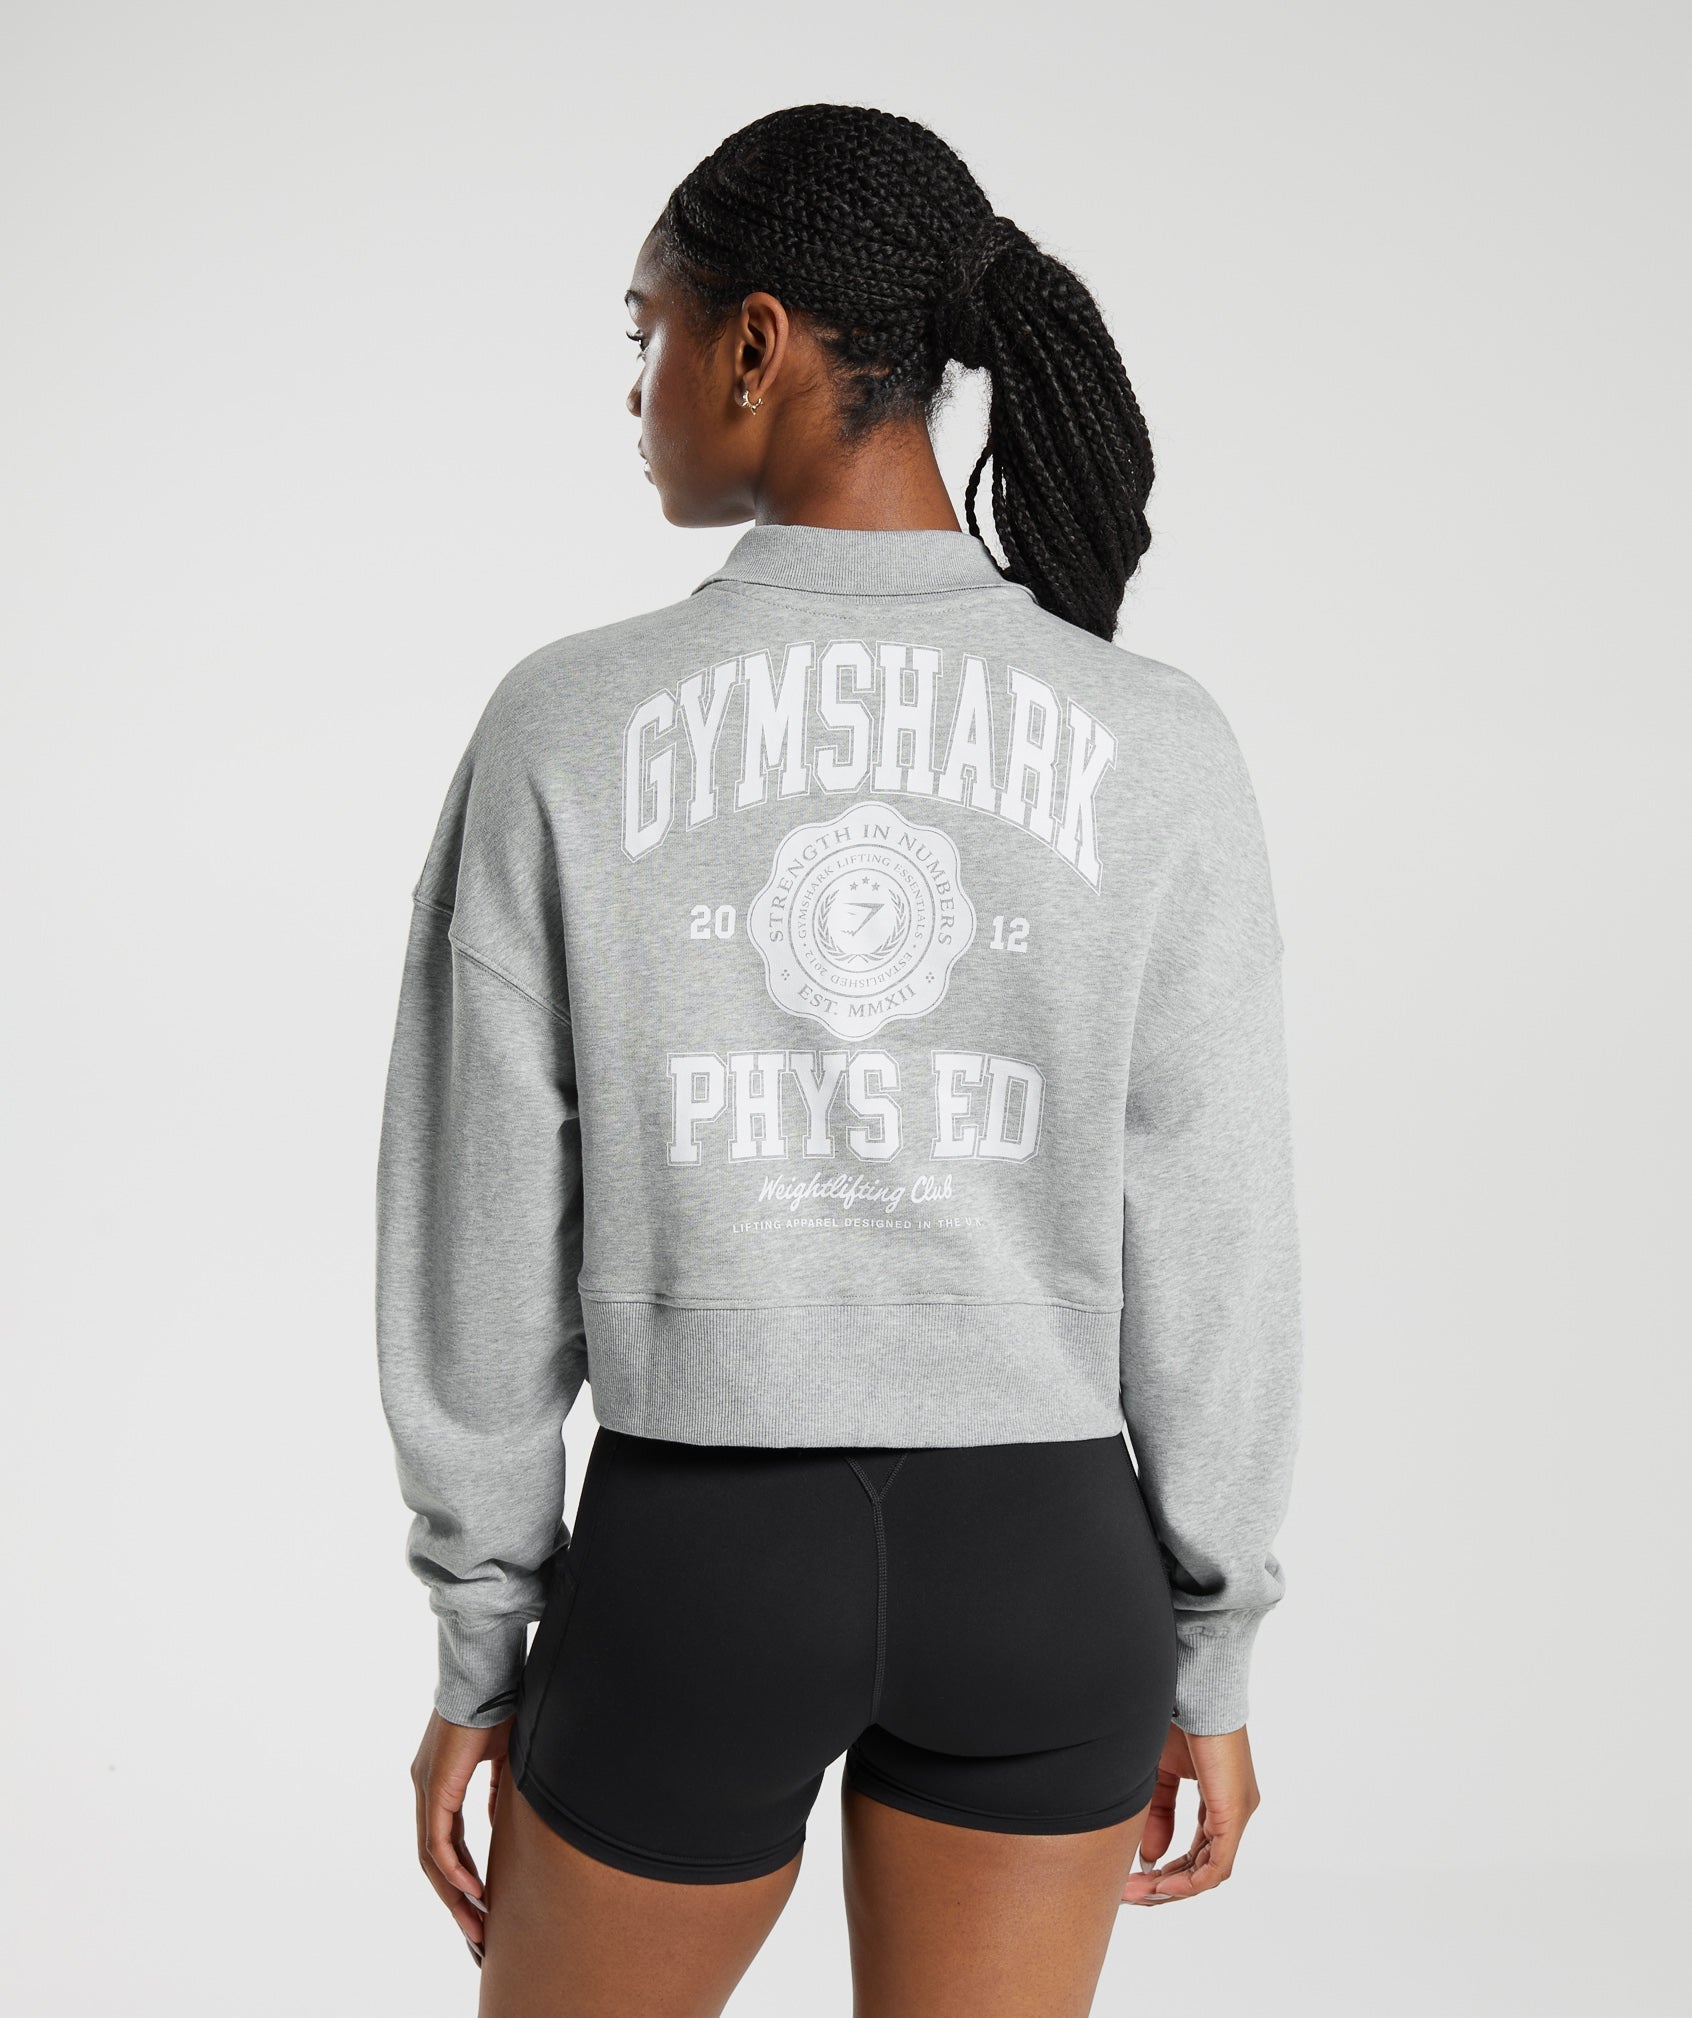 Phys Ed Graphic 1/4 Zip in Light Grey Core Marl - view 1